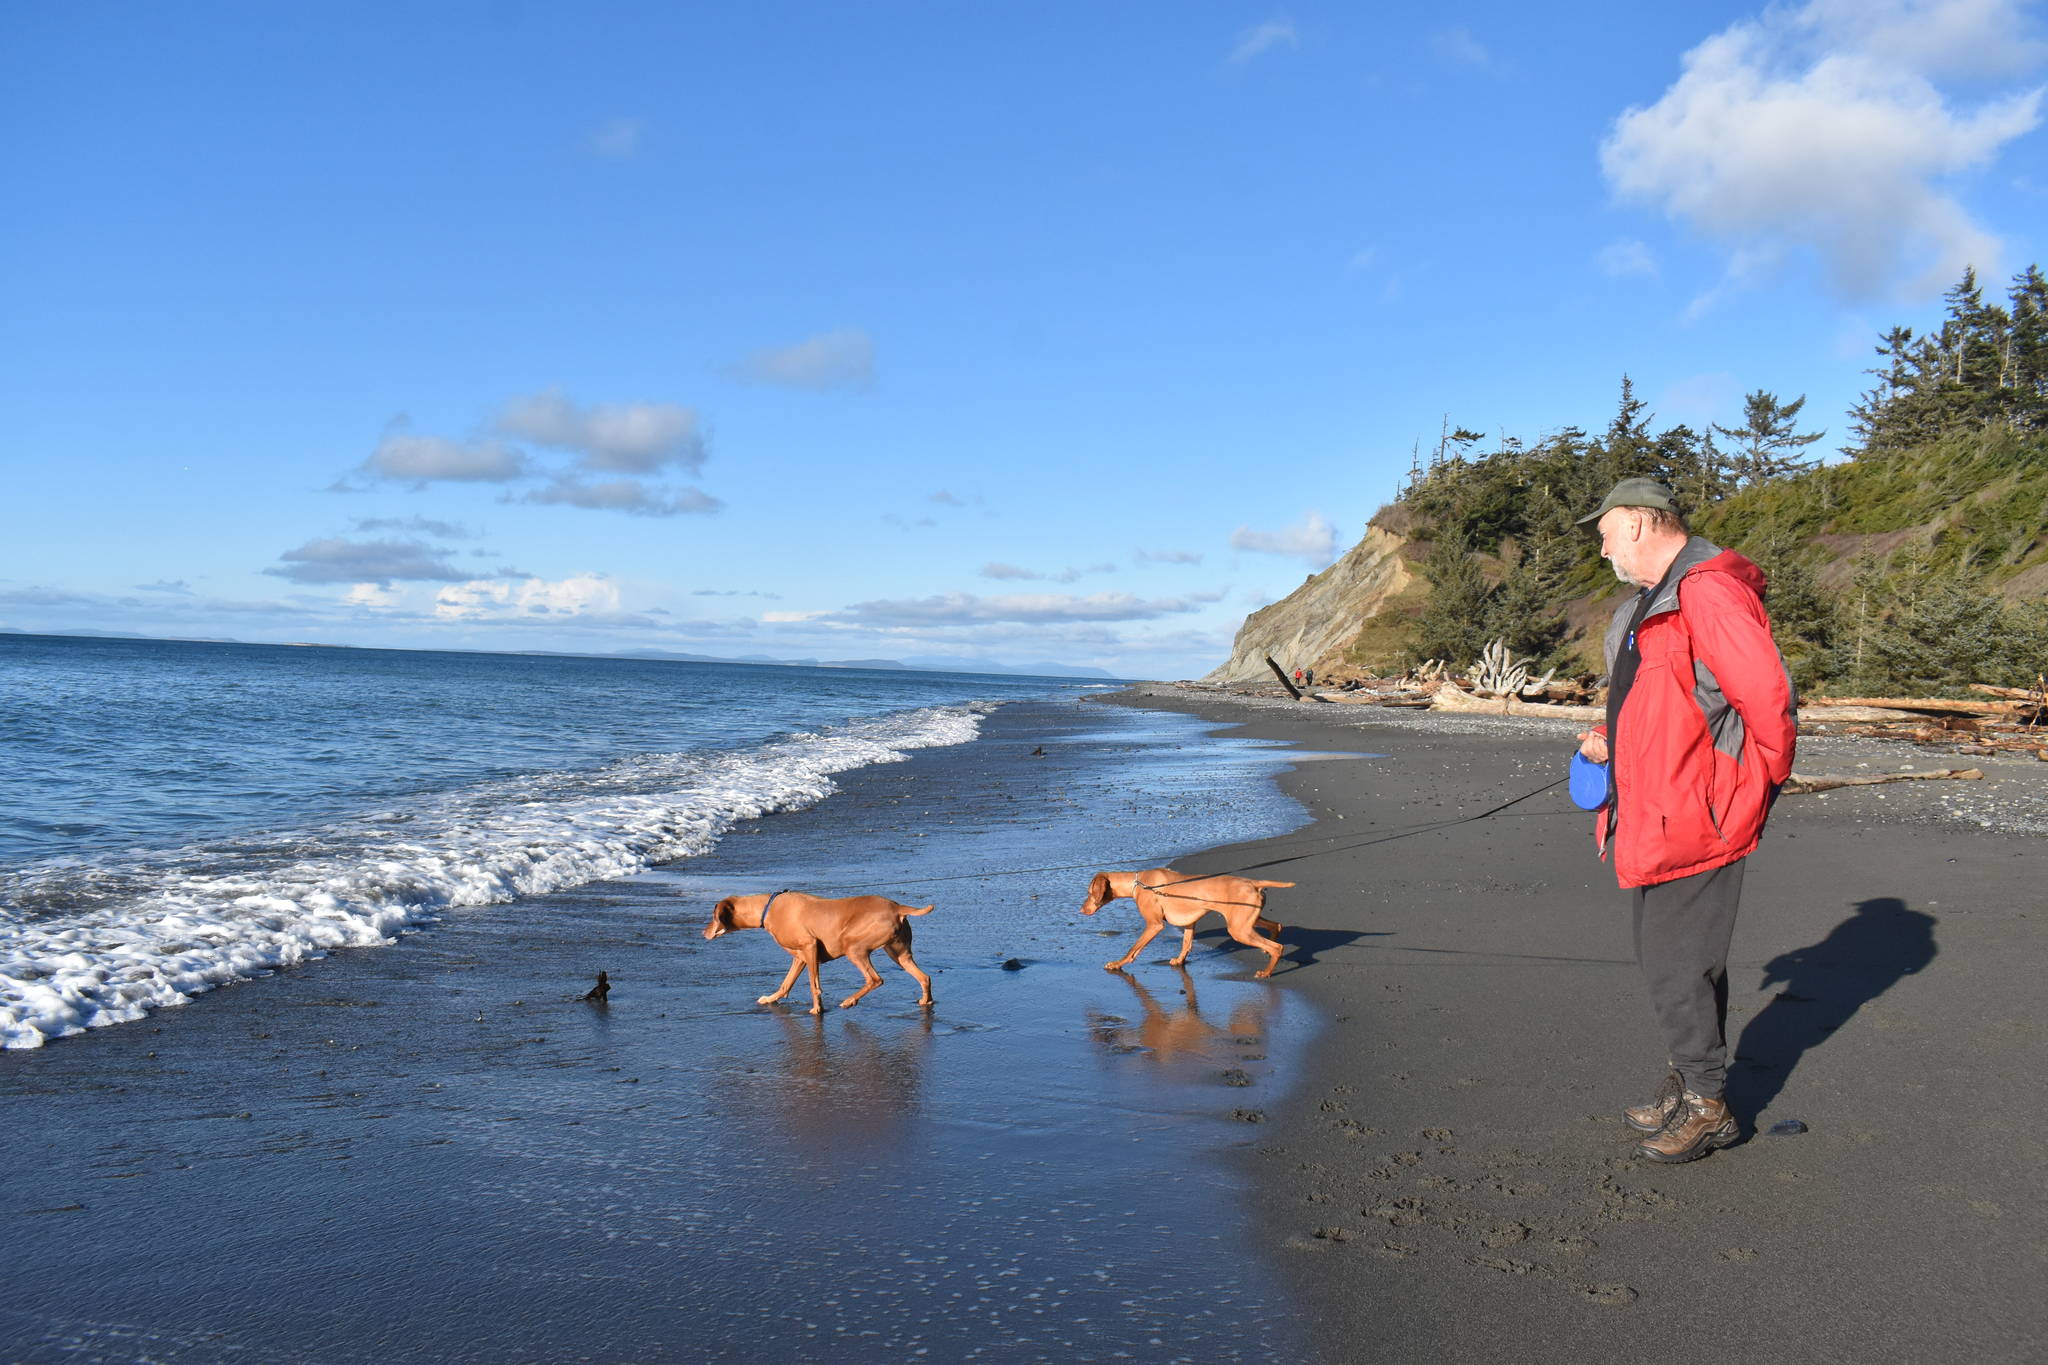 Chessie and Calamity, with owner Bill Hoff of Missoula, Mont., touched the ocean for the first time at Fort Ebey State Park near Coupeville. The park is one of 28 that the Navy has identified as a training site in its expanded proposal. Photo by Emily Gilbert/Whidbey News-Times